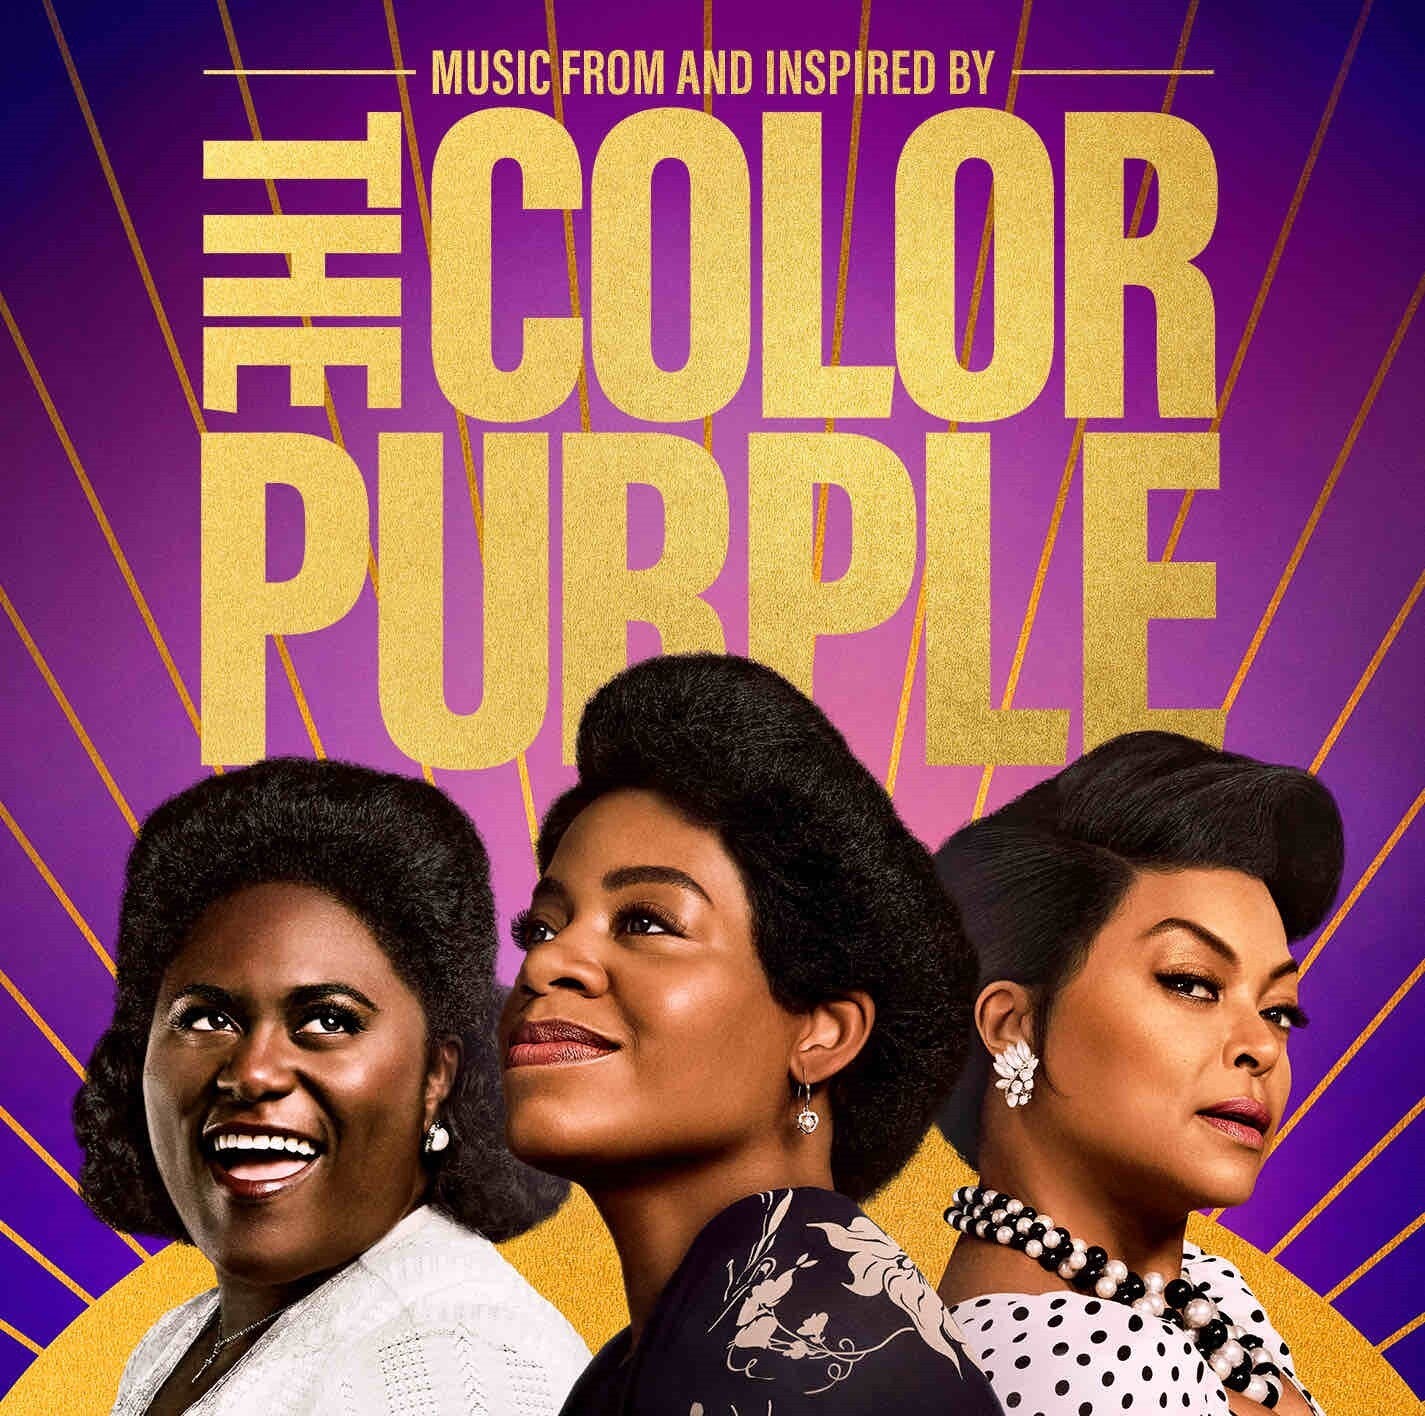 Various Artists - The Color Purple (Music From And Inspired By): Limited Purple Vinyl 3LP